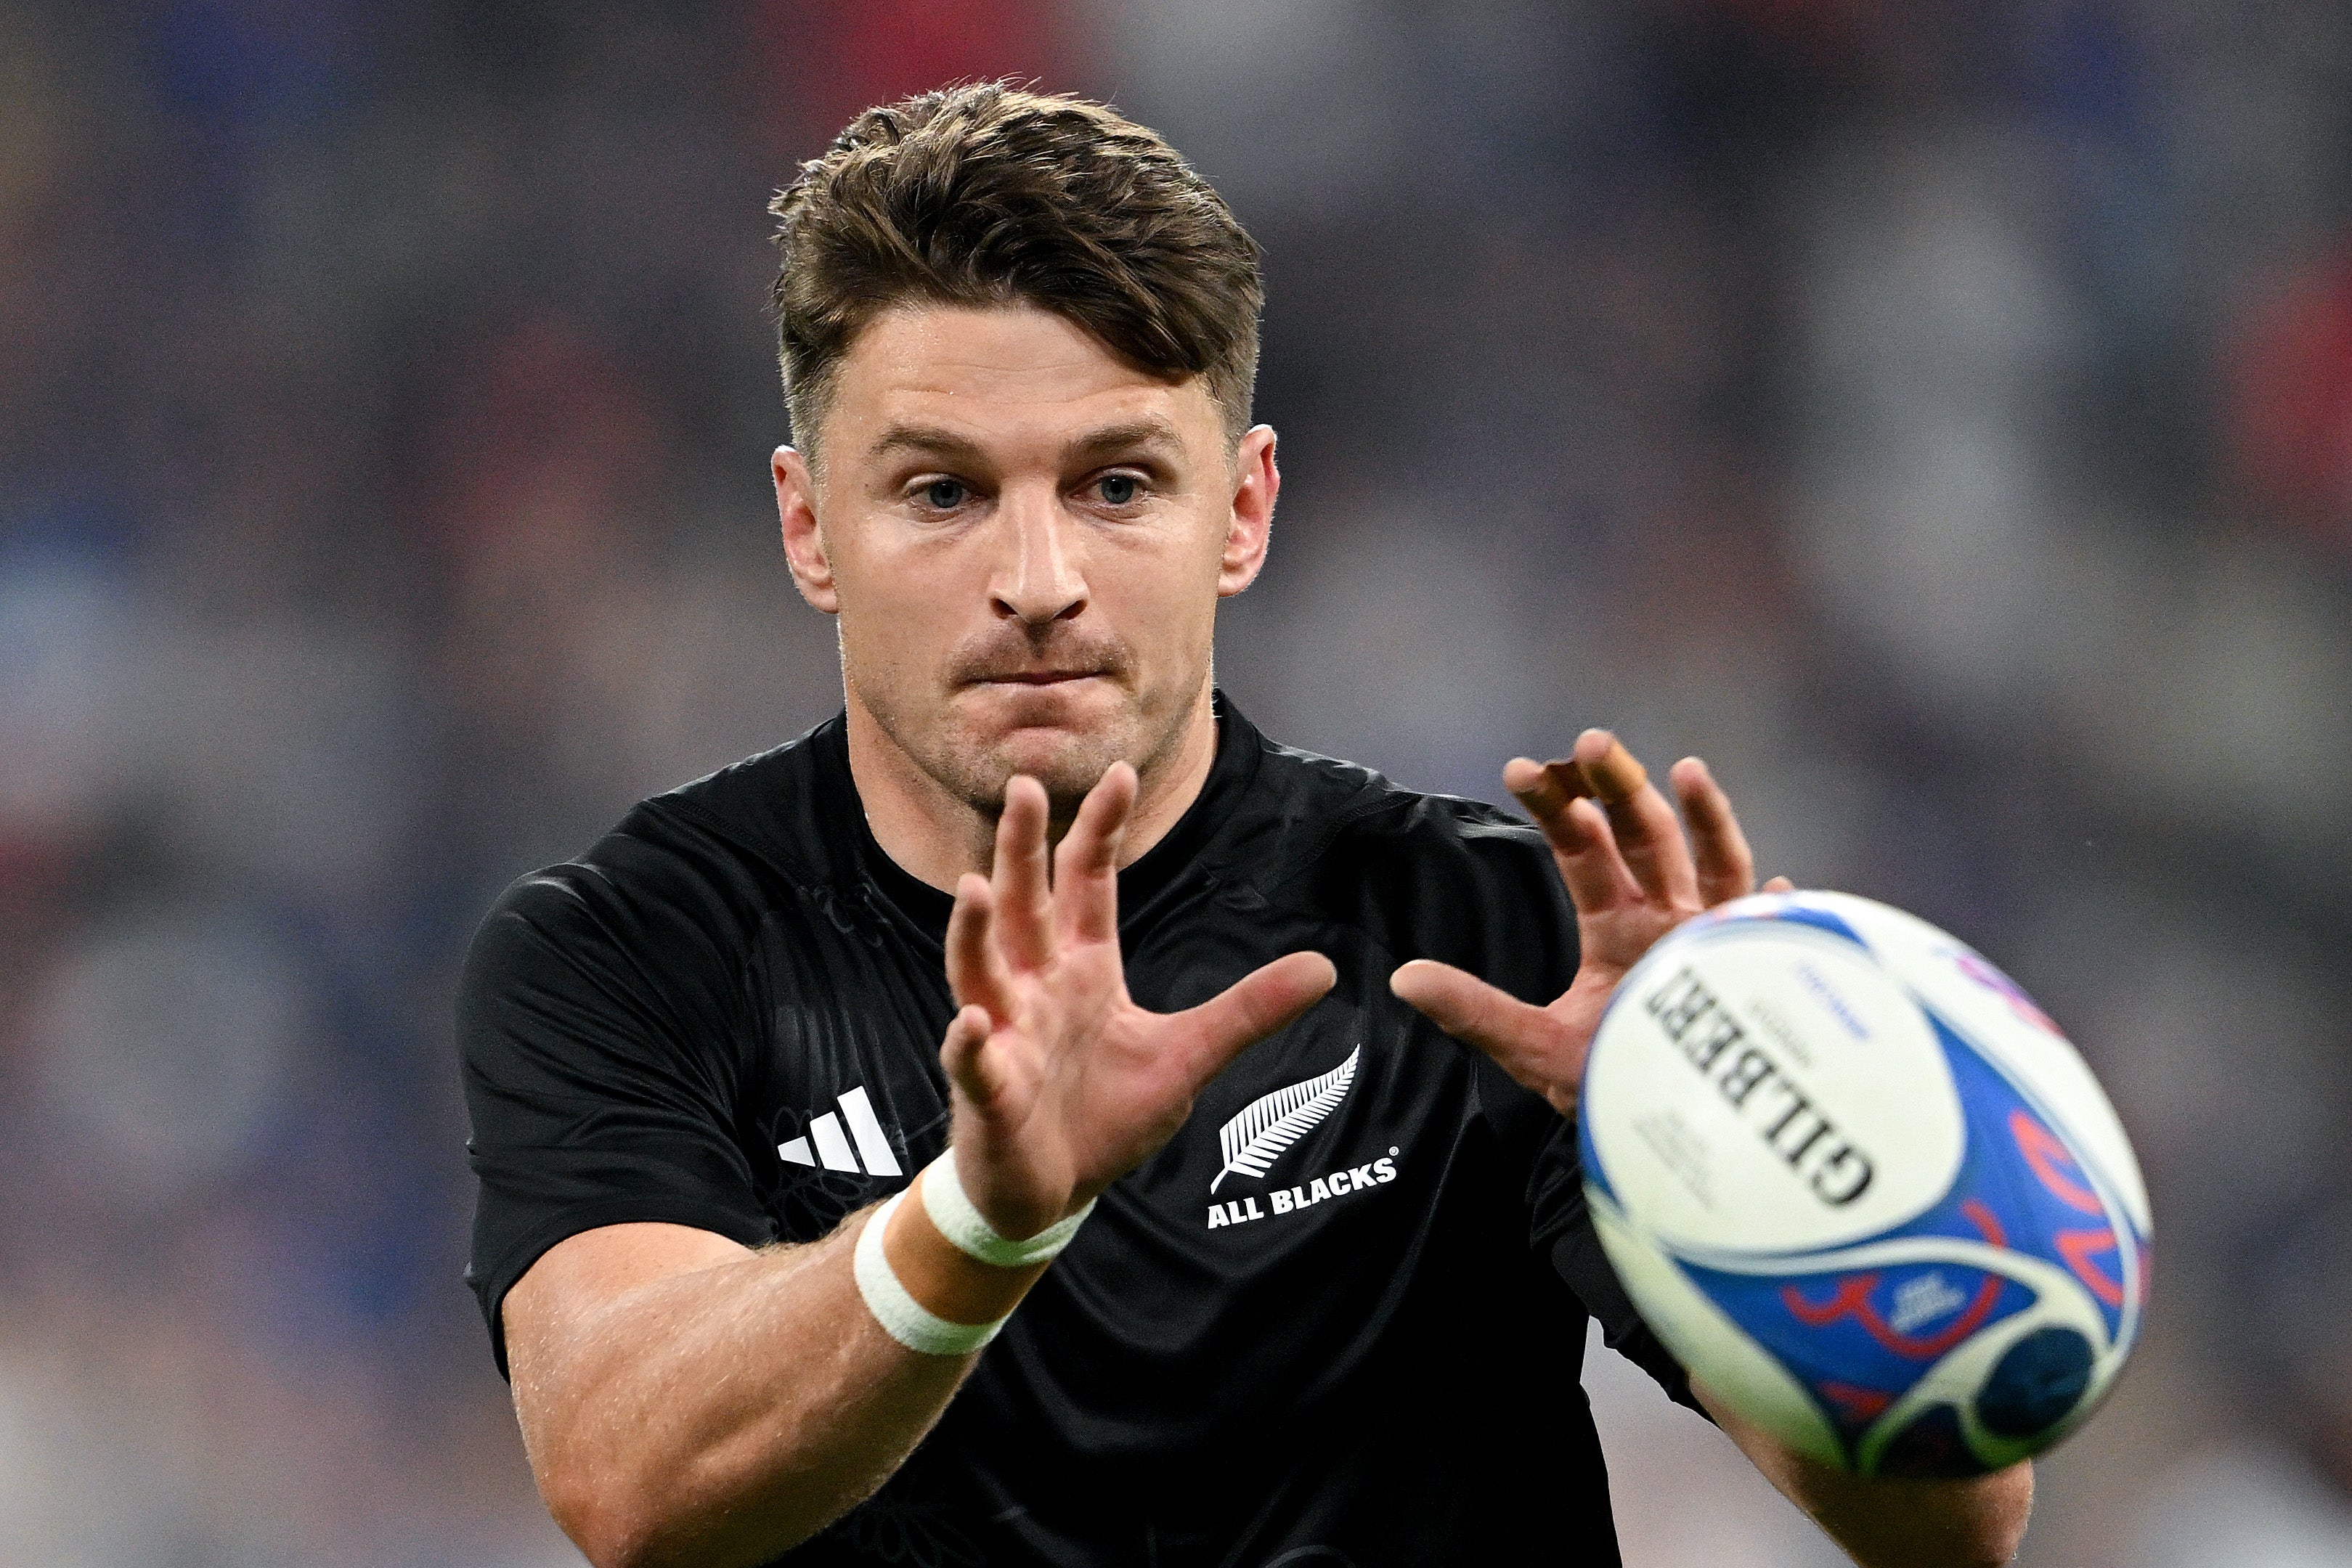 Beauden Barrett of New Zealand is one of the game’s finest full-backs